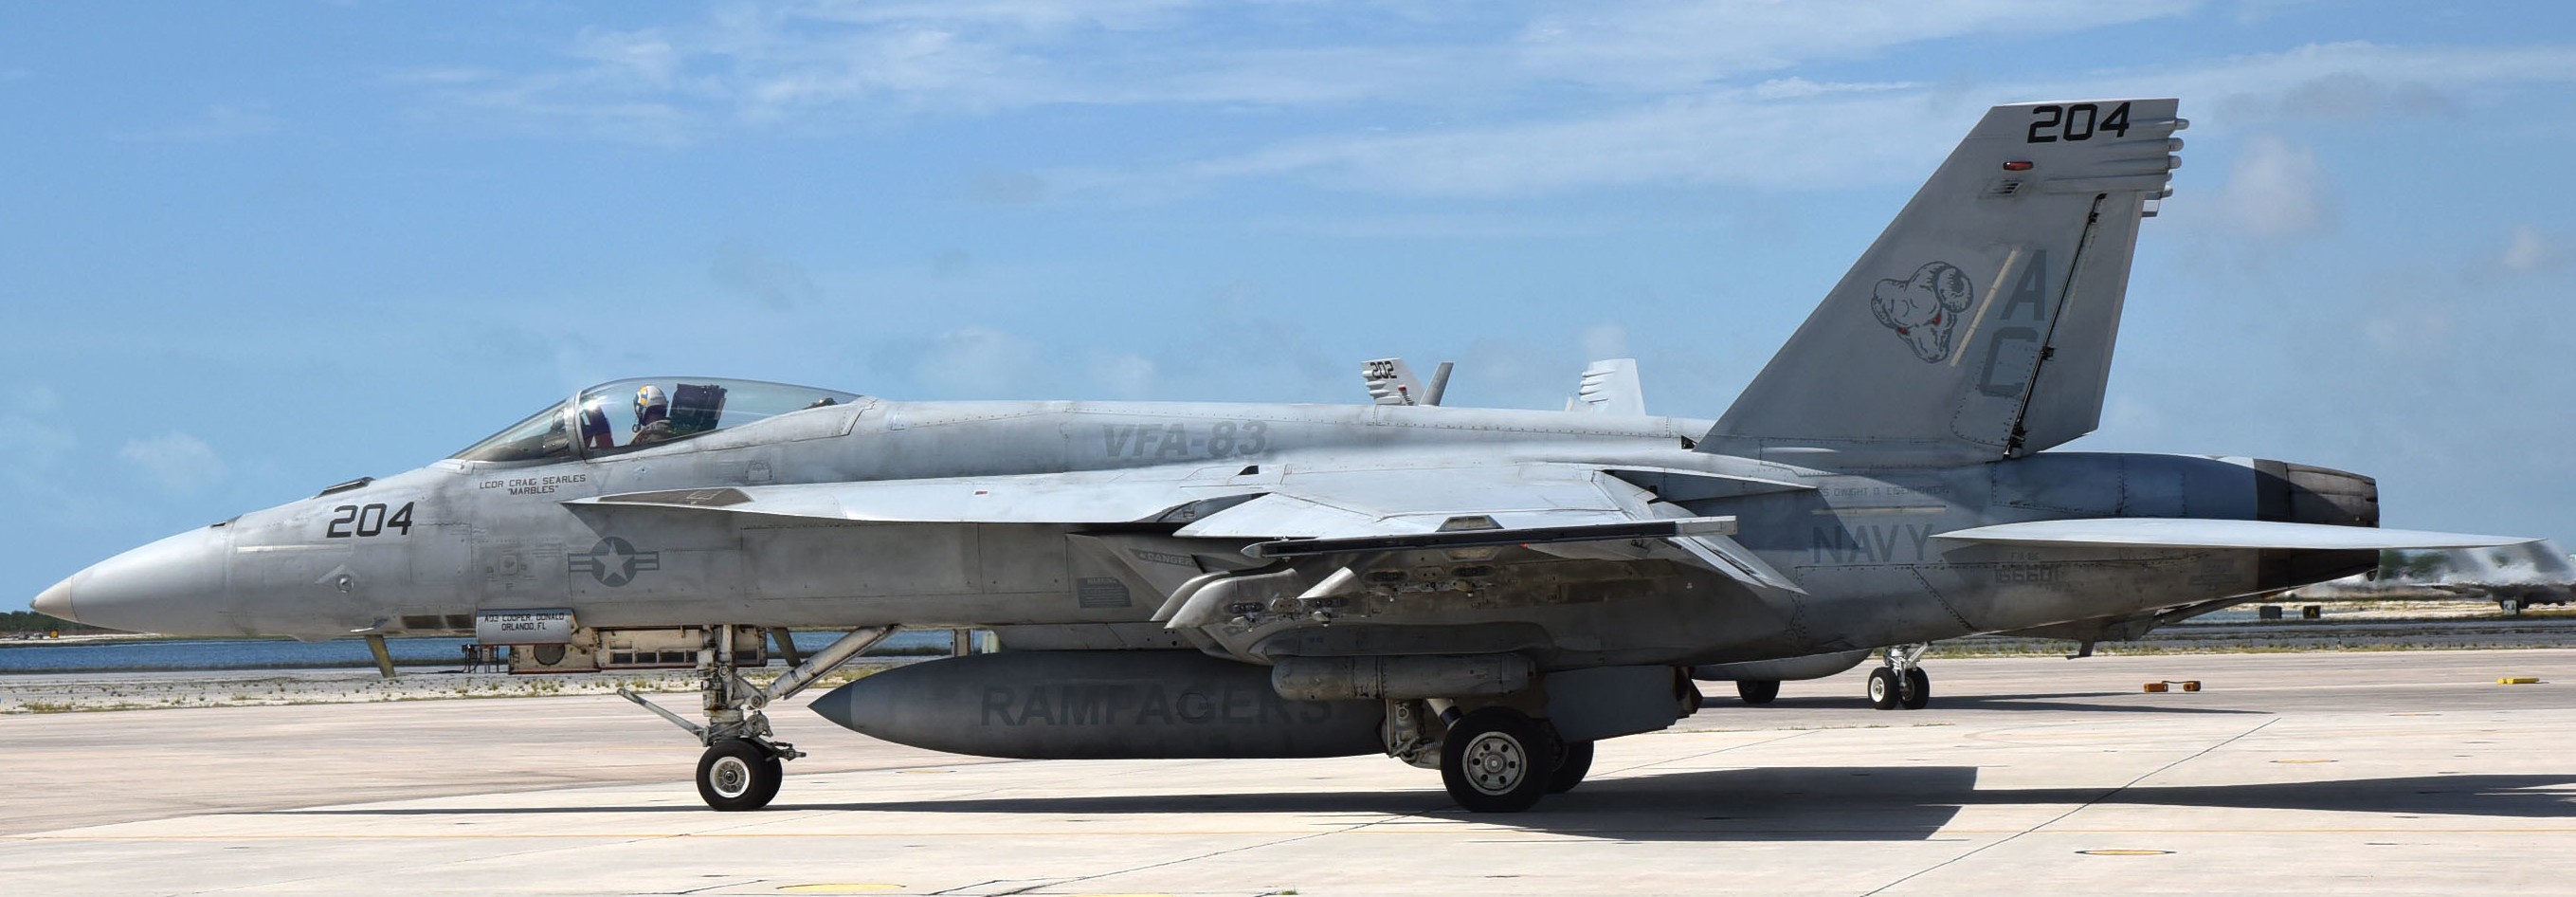 vfa-83 rampagers strike fighter squadron f/a-18e super hornet us navy nas key west florida 58